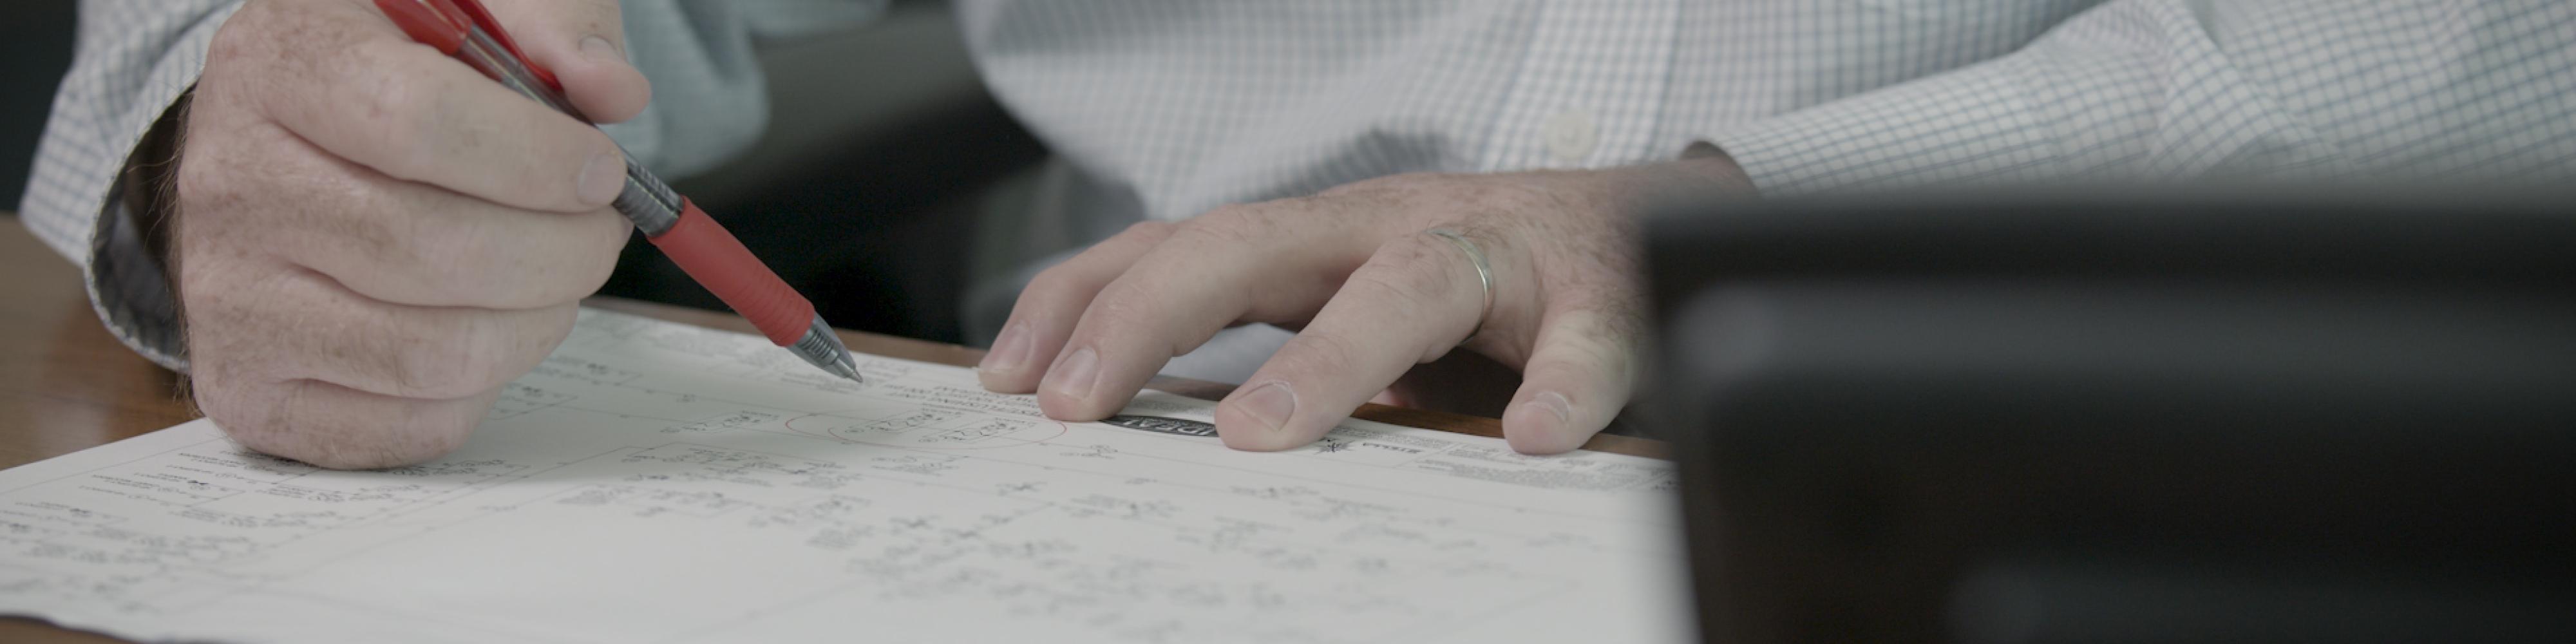 image of a person reviewing blue prints for a custom manufactured SKID